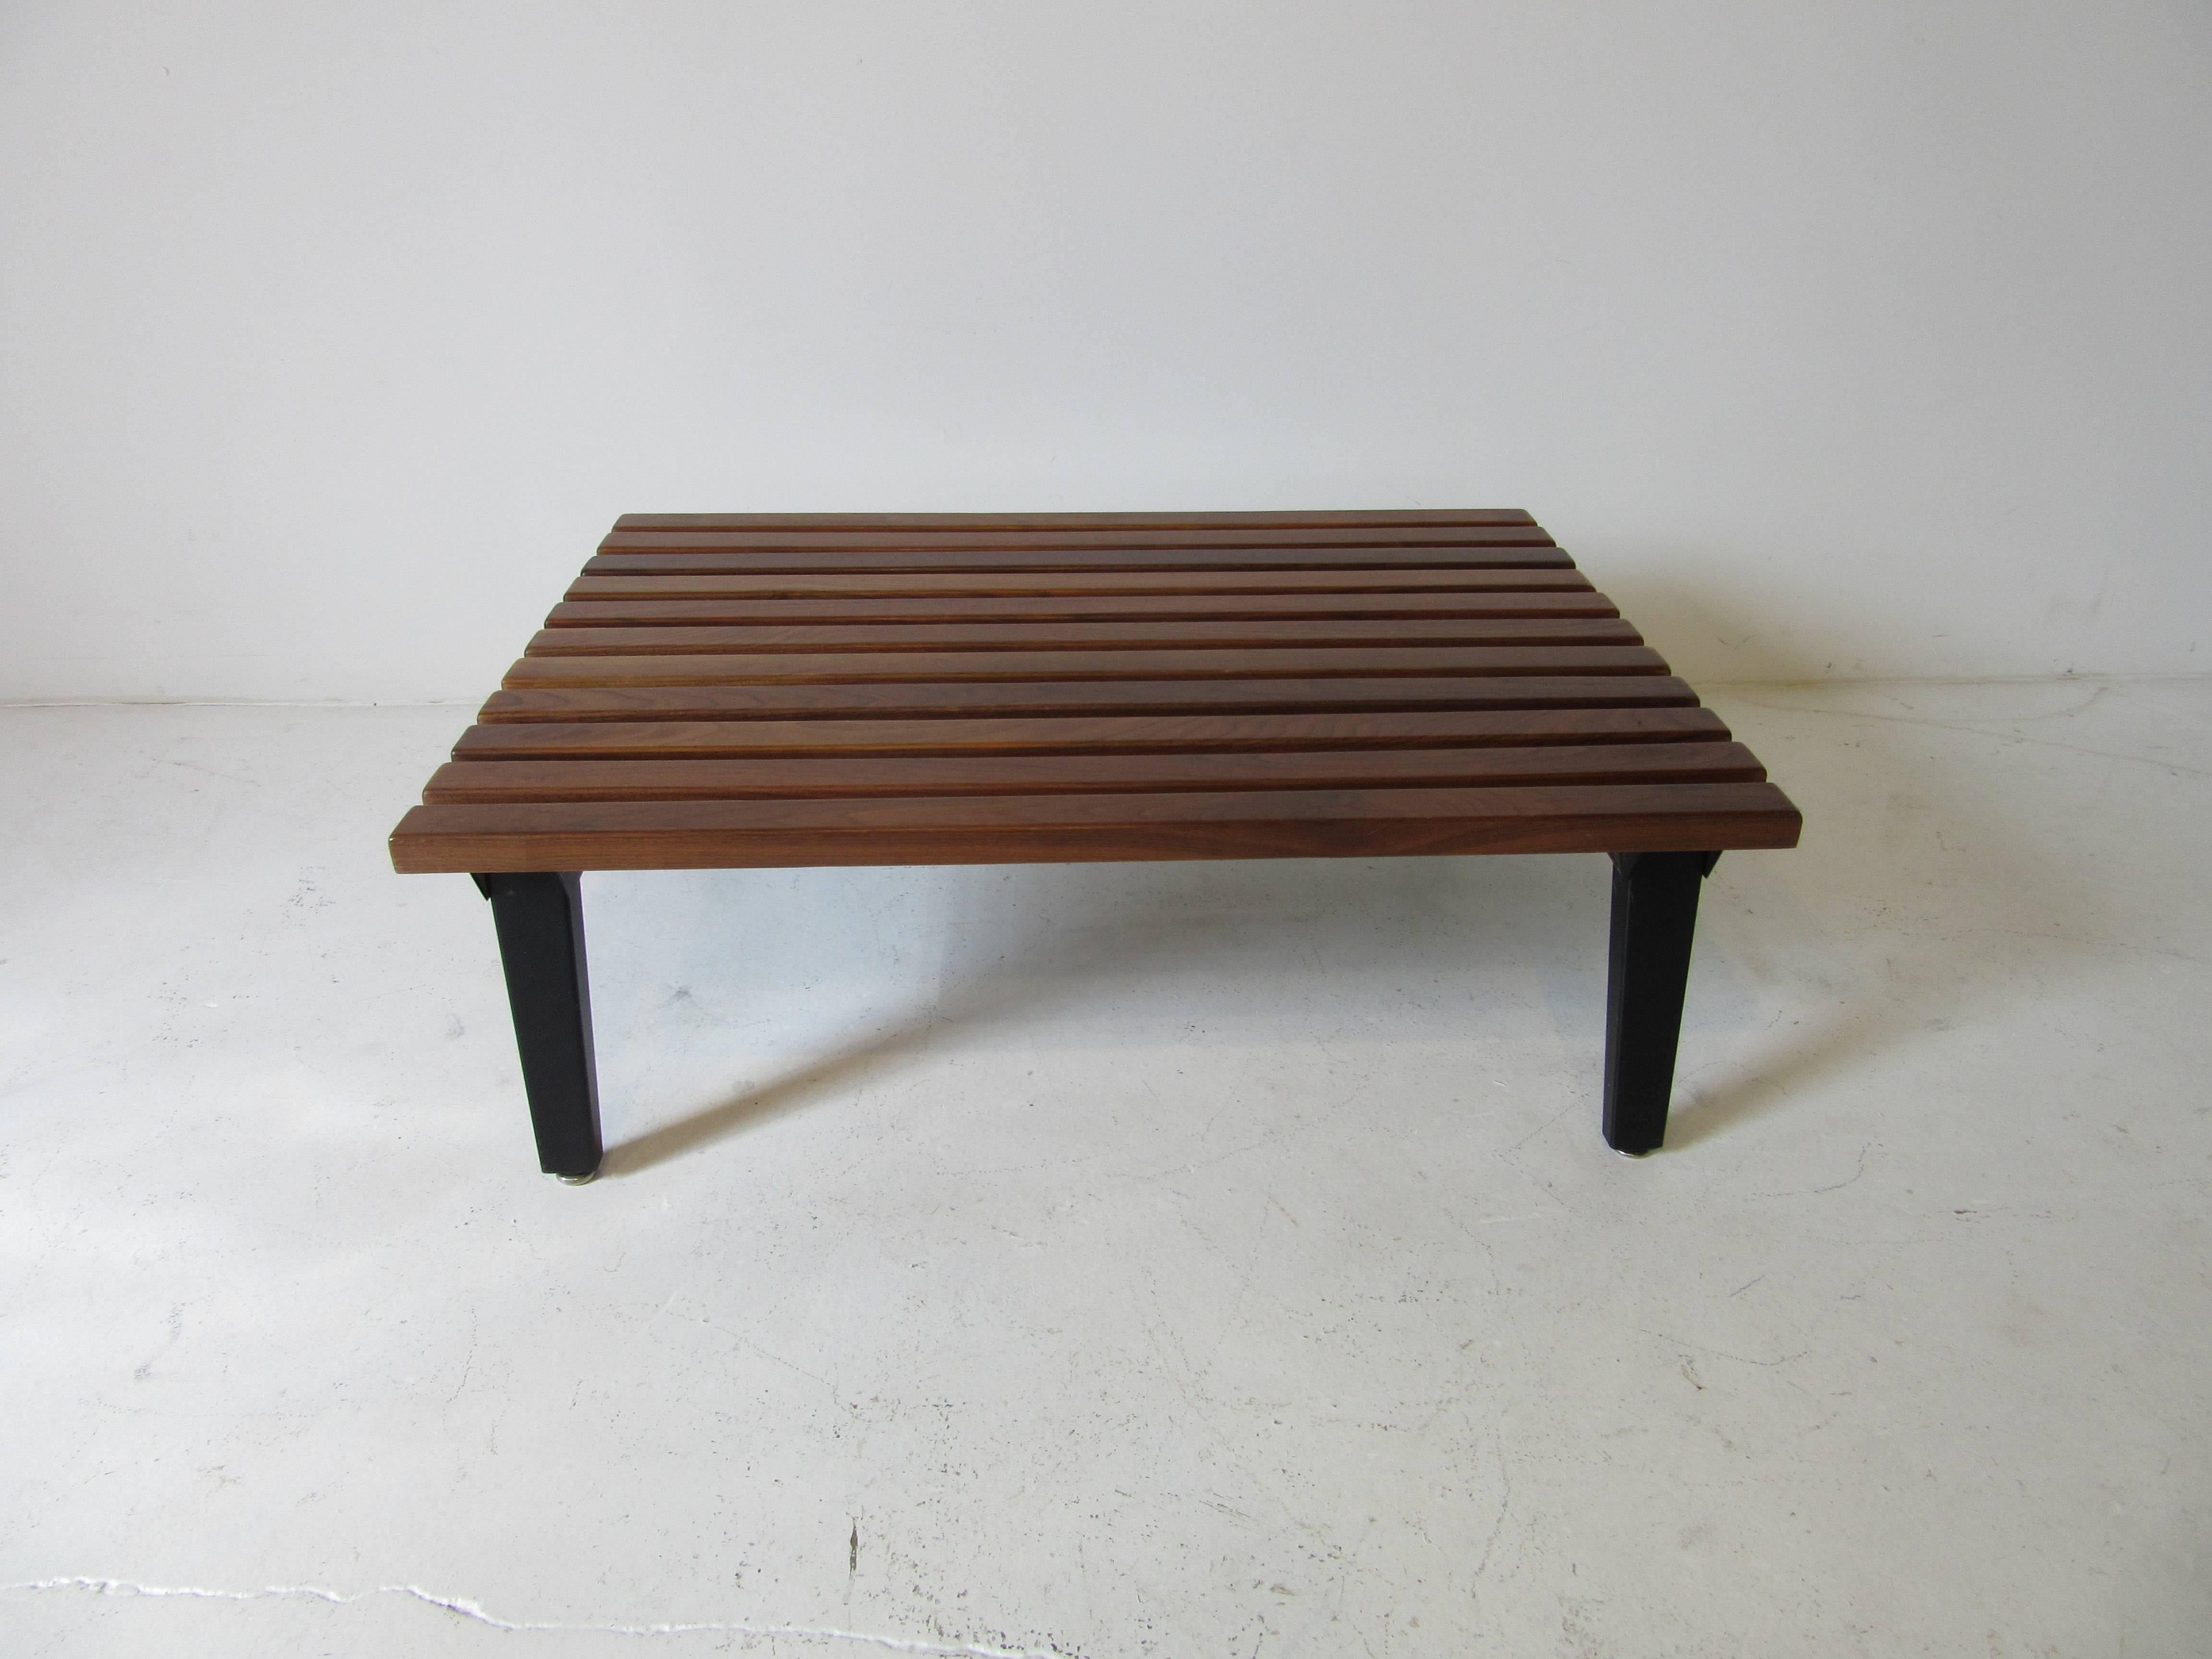 20th Century Rare George Nelson Steel Frame Walnut Slated Coffee Table by Herman Miller